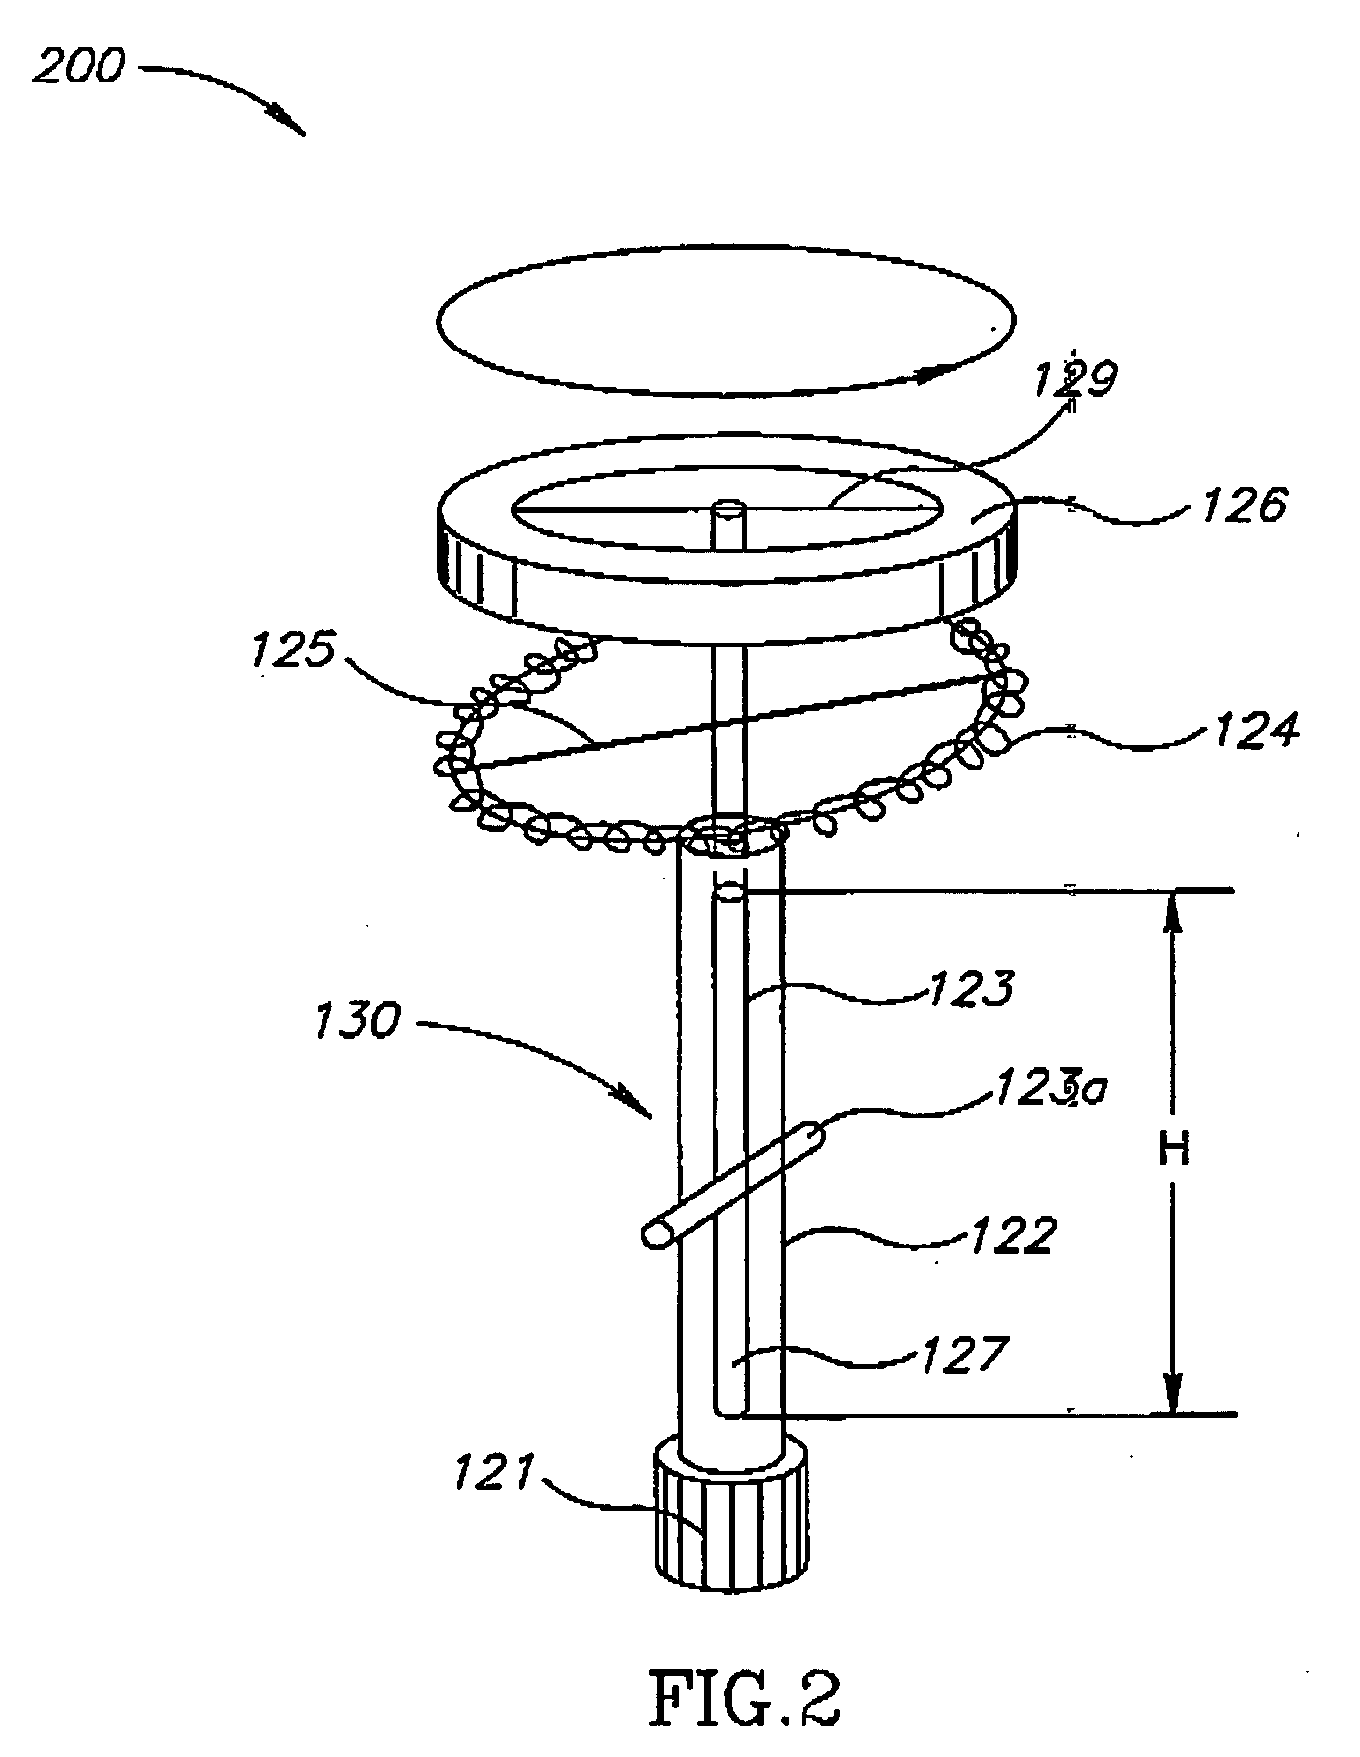 Device, system and method to heat and froth milk